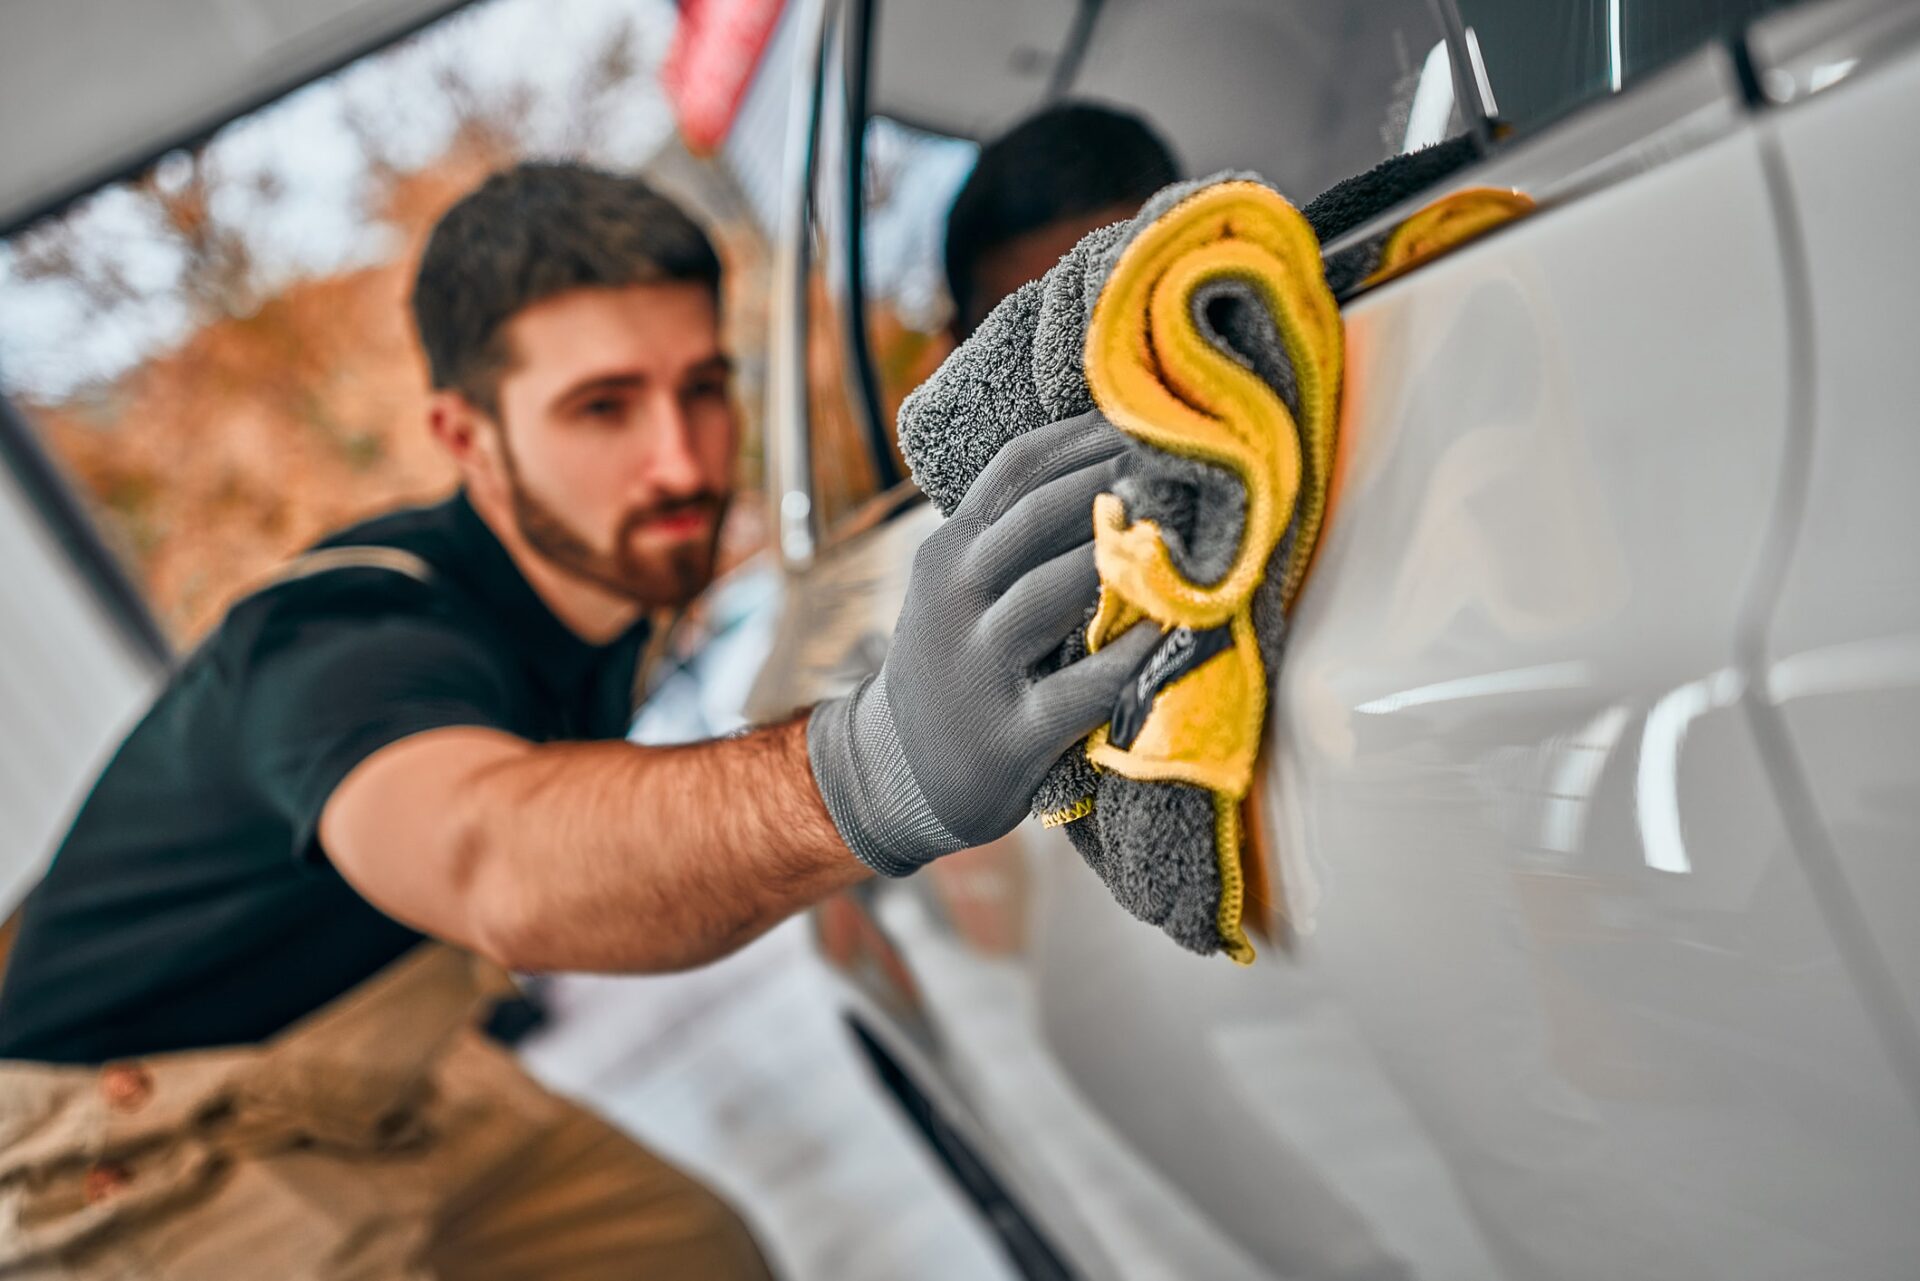 How to Start a Car Detailing Business in 9 Fool Proof Steps